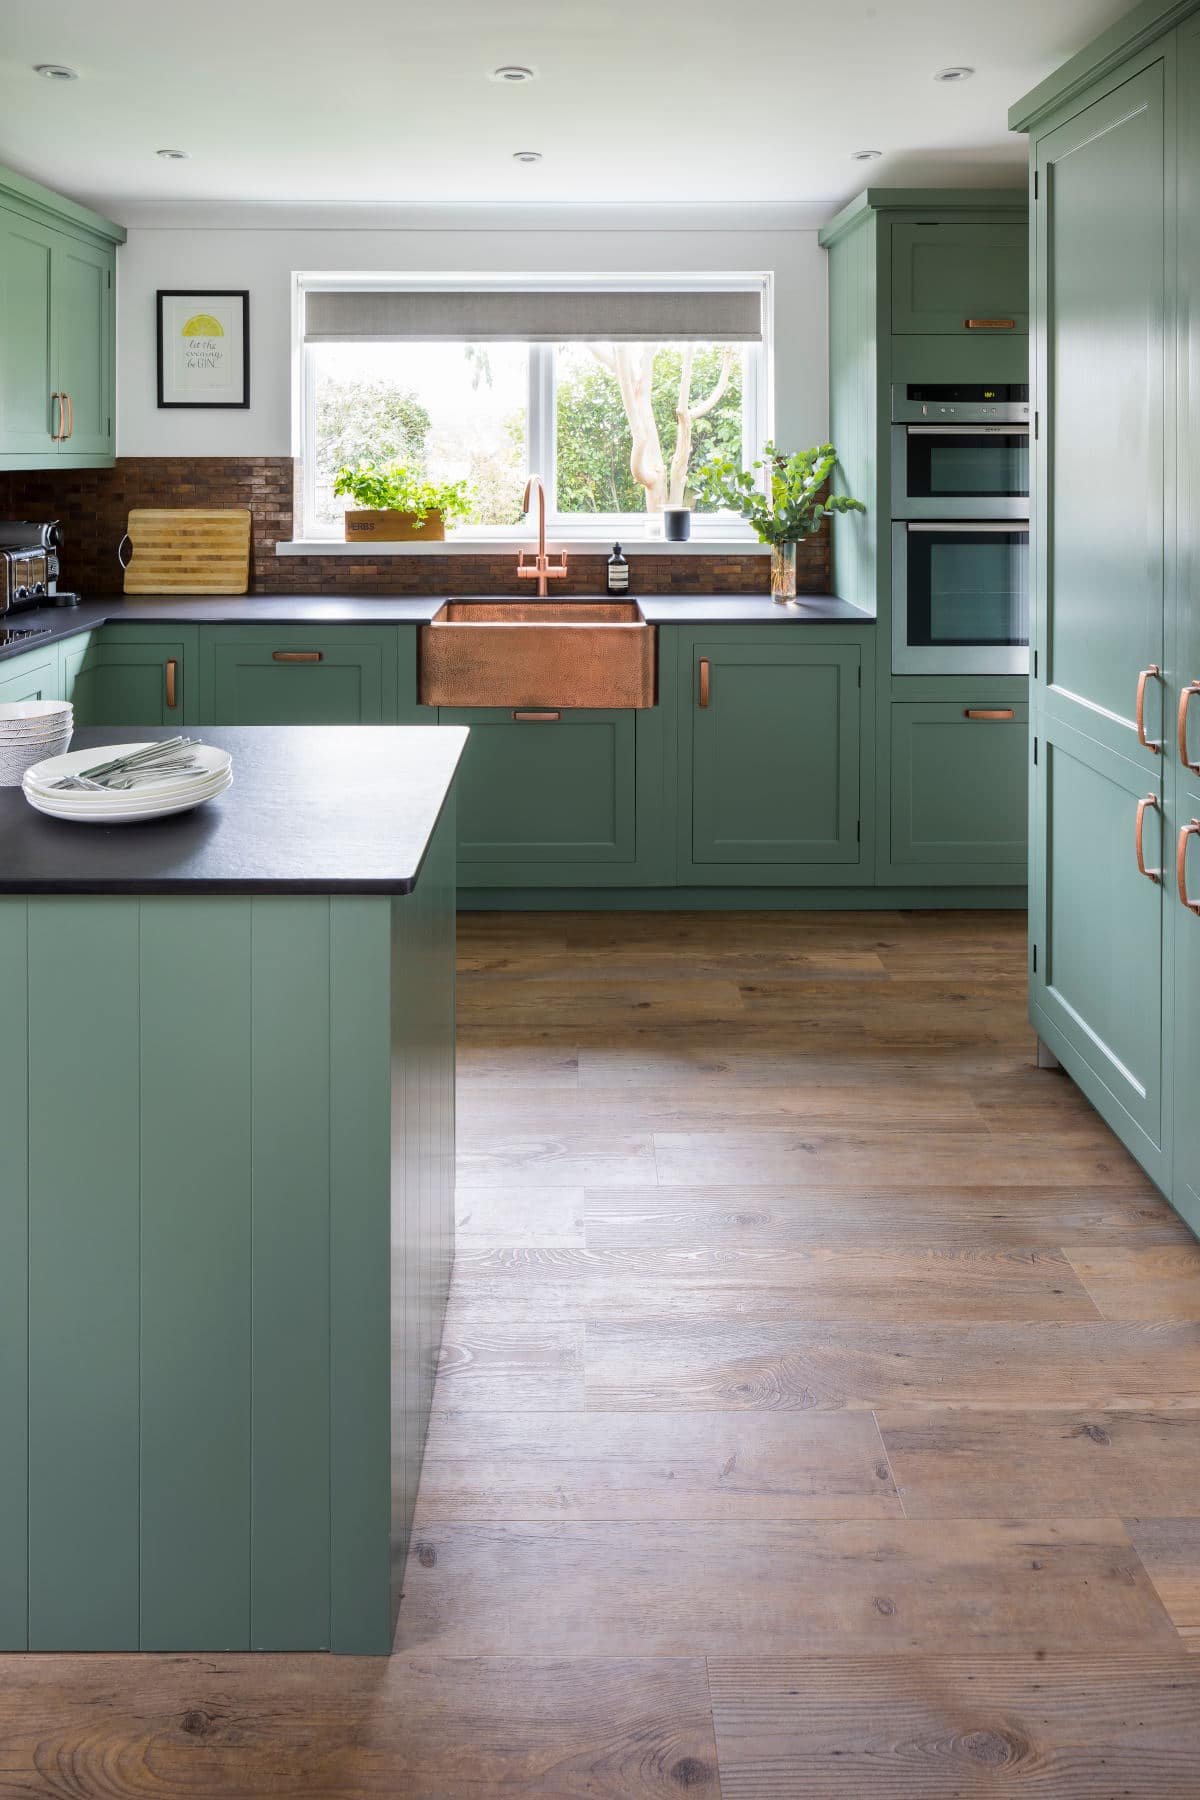 Image of Borston Close 11 in Making the kitchen the heart of the home - Cosentino